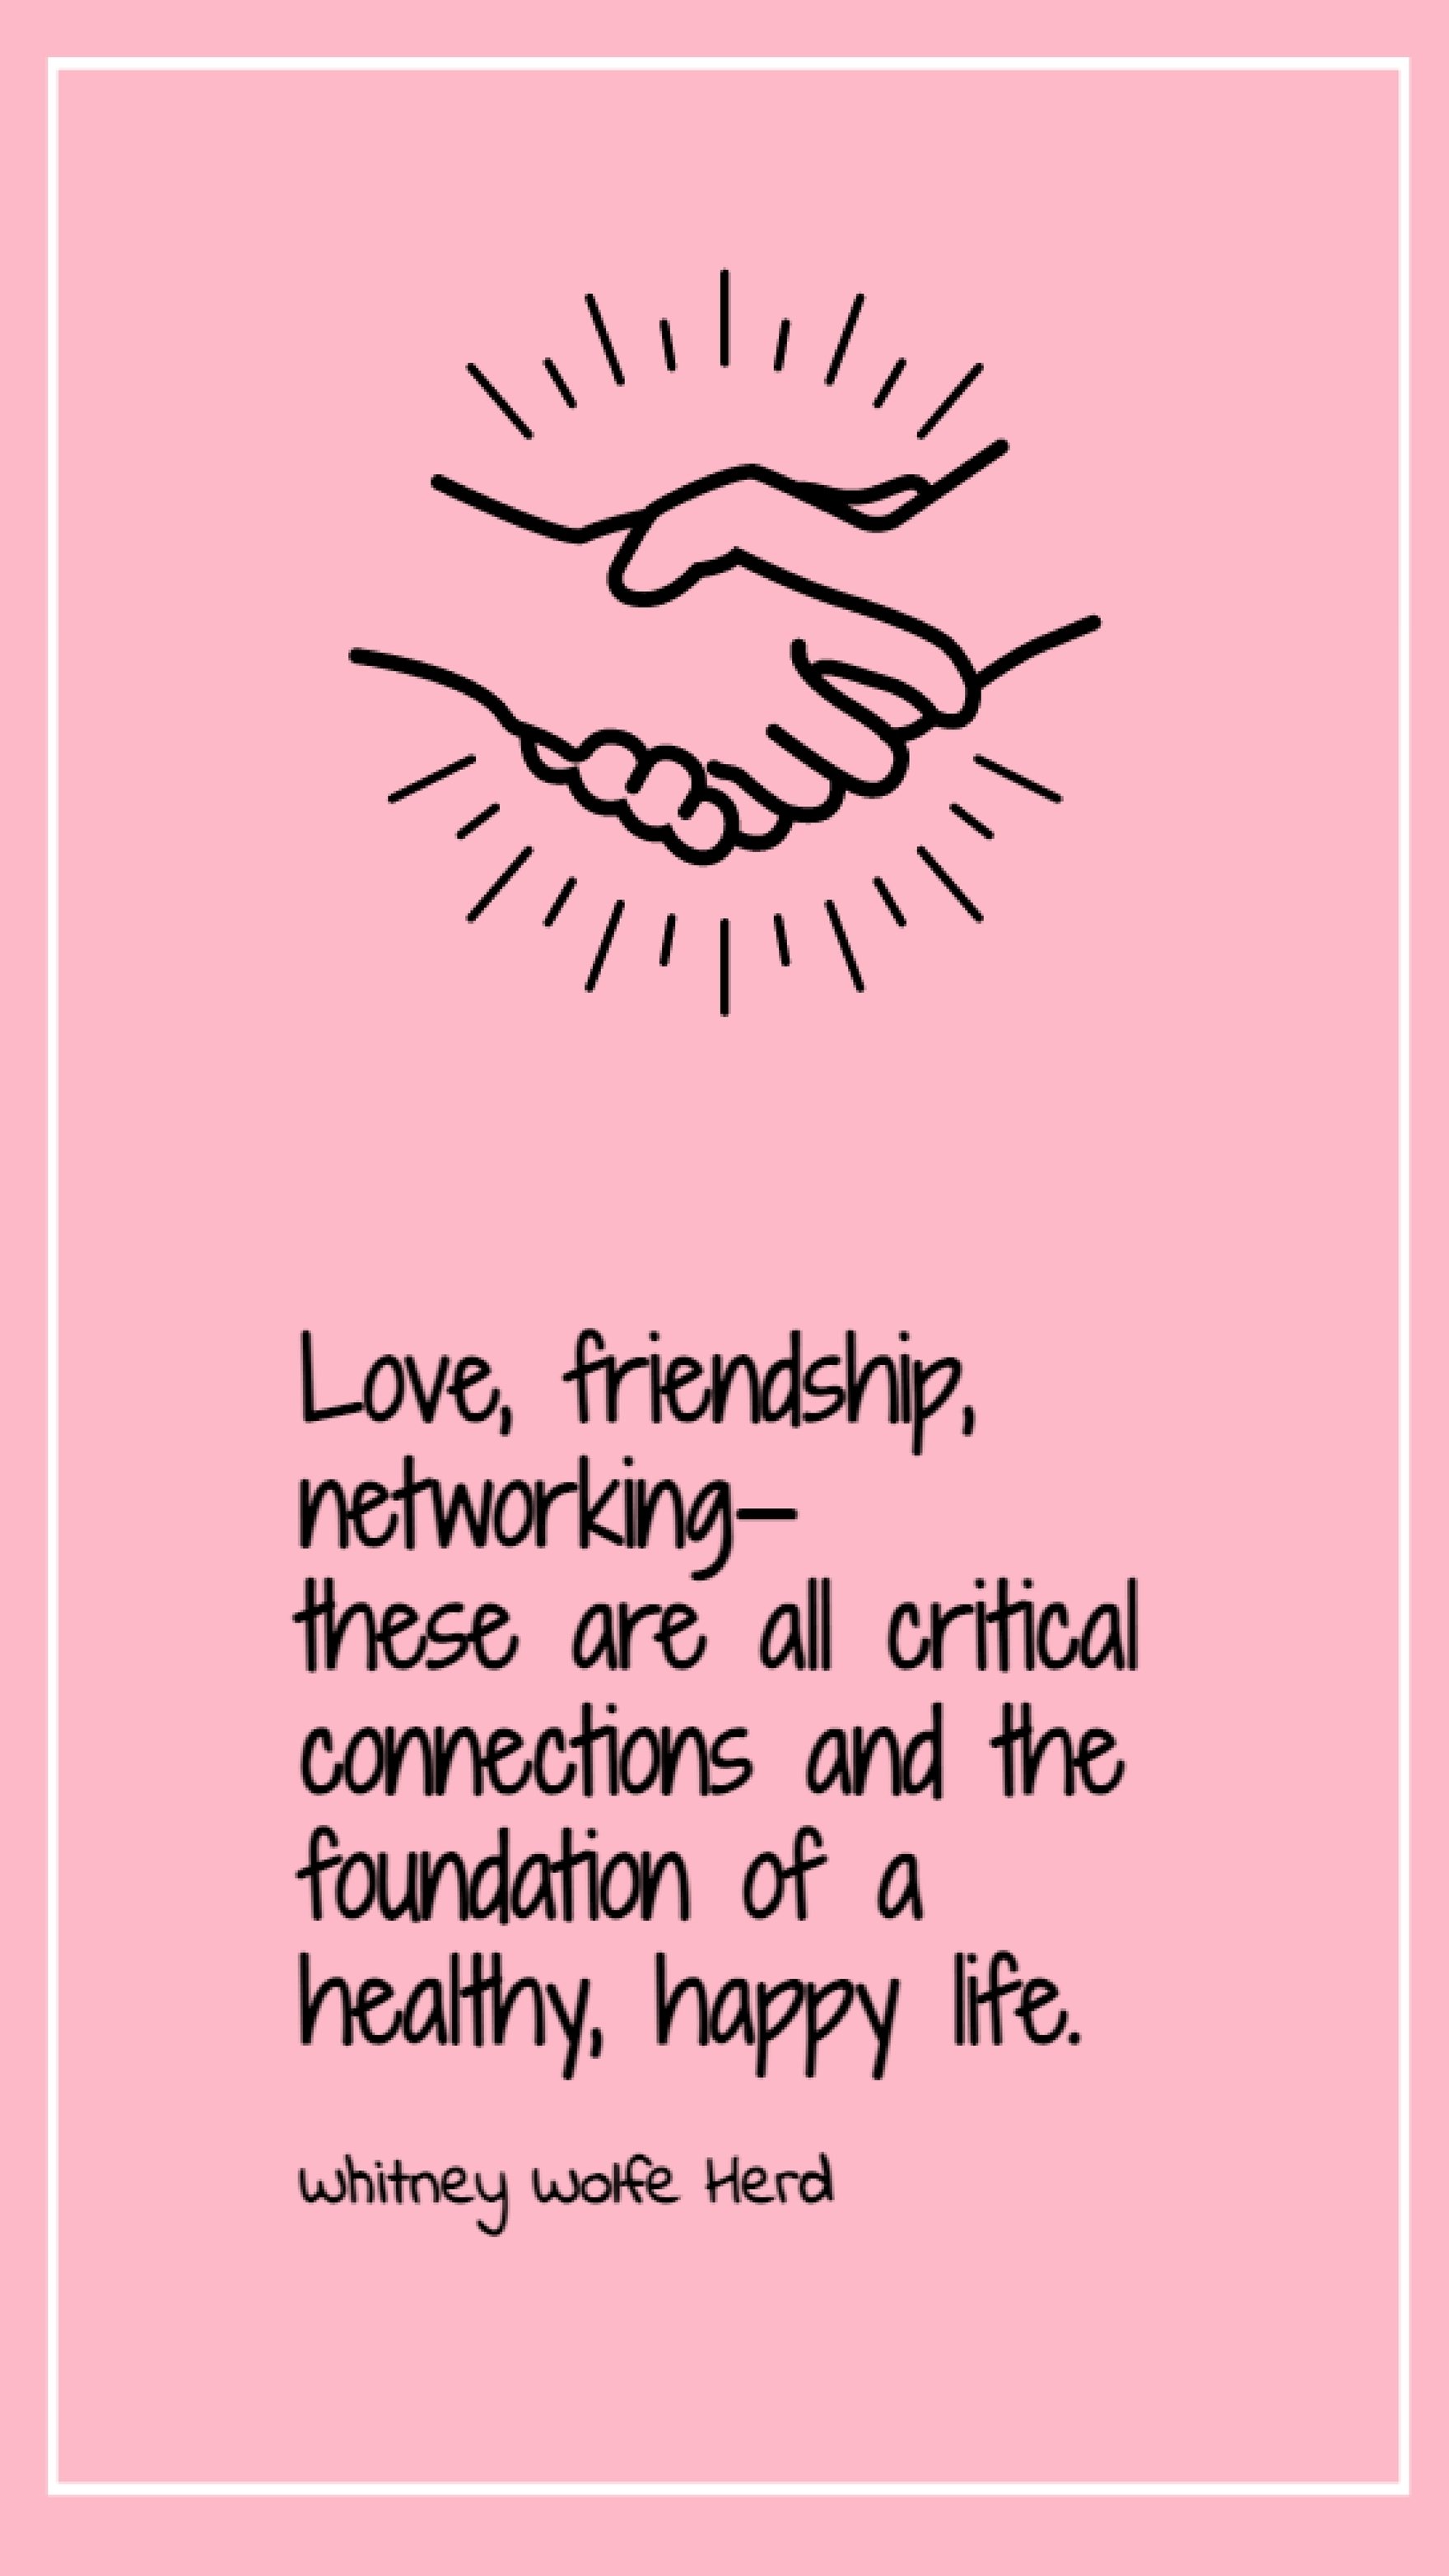 Whitney Wolfe Herd - Love, friendship, networking - these are all critical connections and the foundation of a healthy, happy life. Template